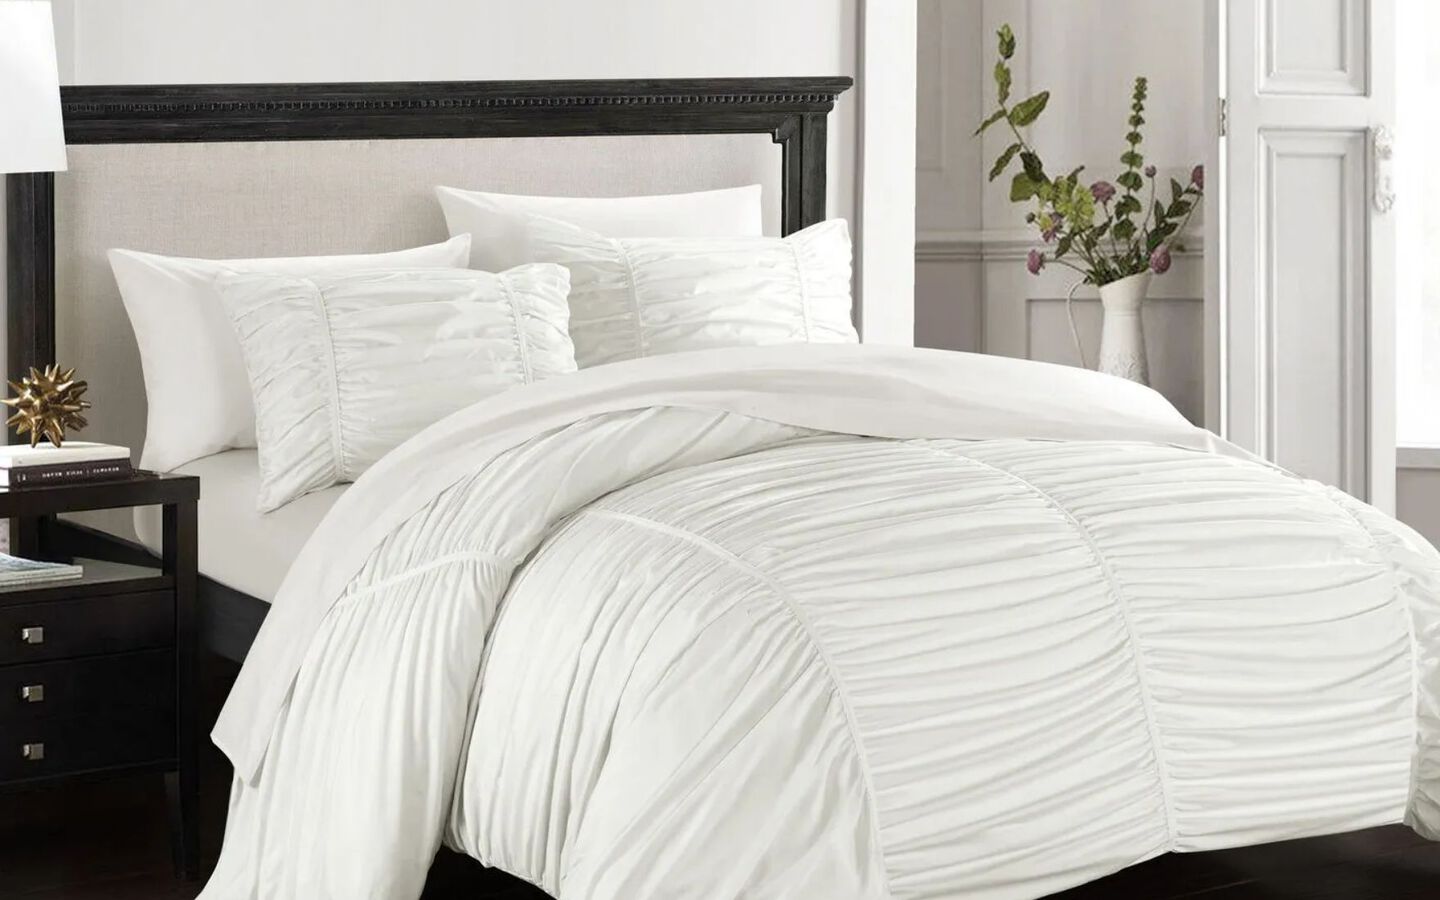 Bed with black bedframe and white textured bedding and matching pillow shams